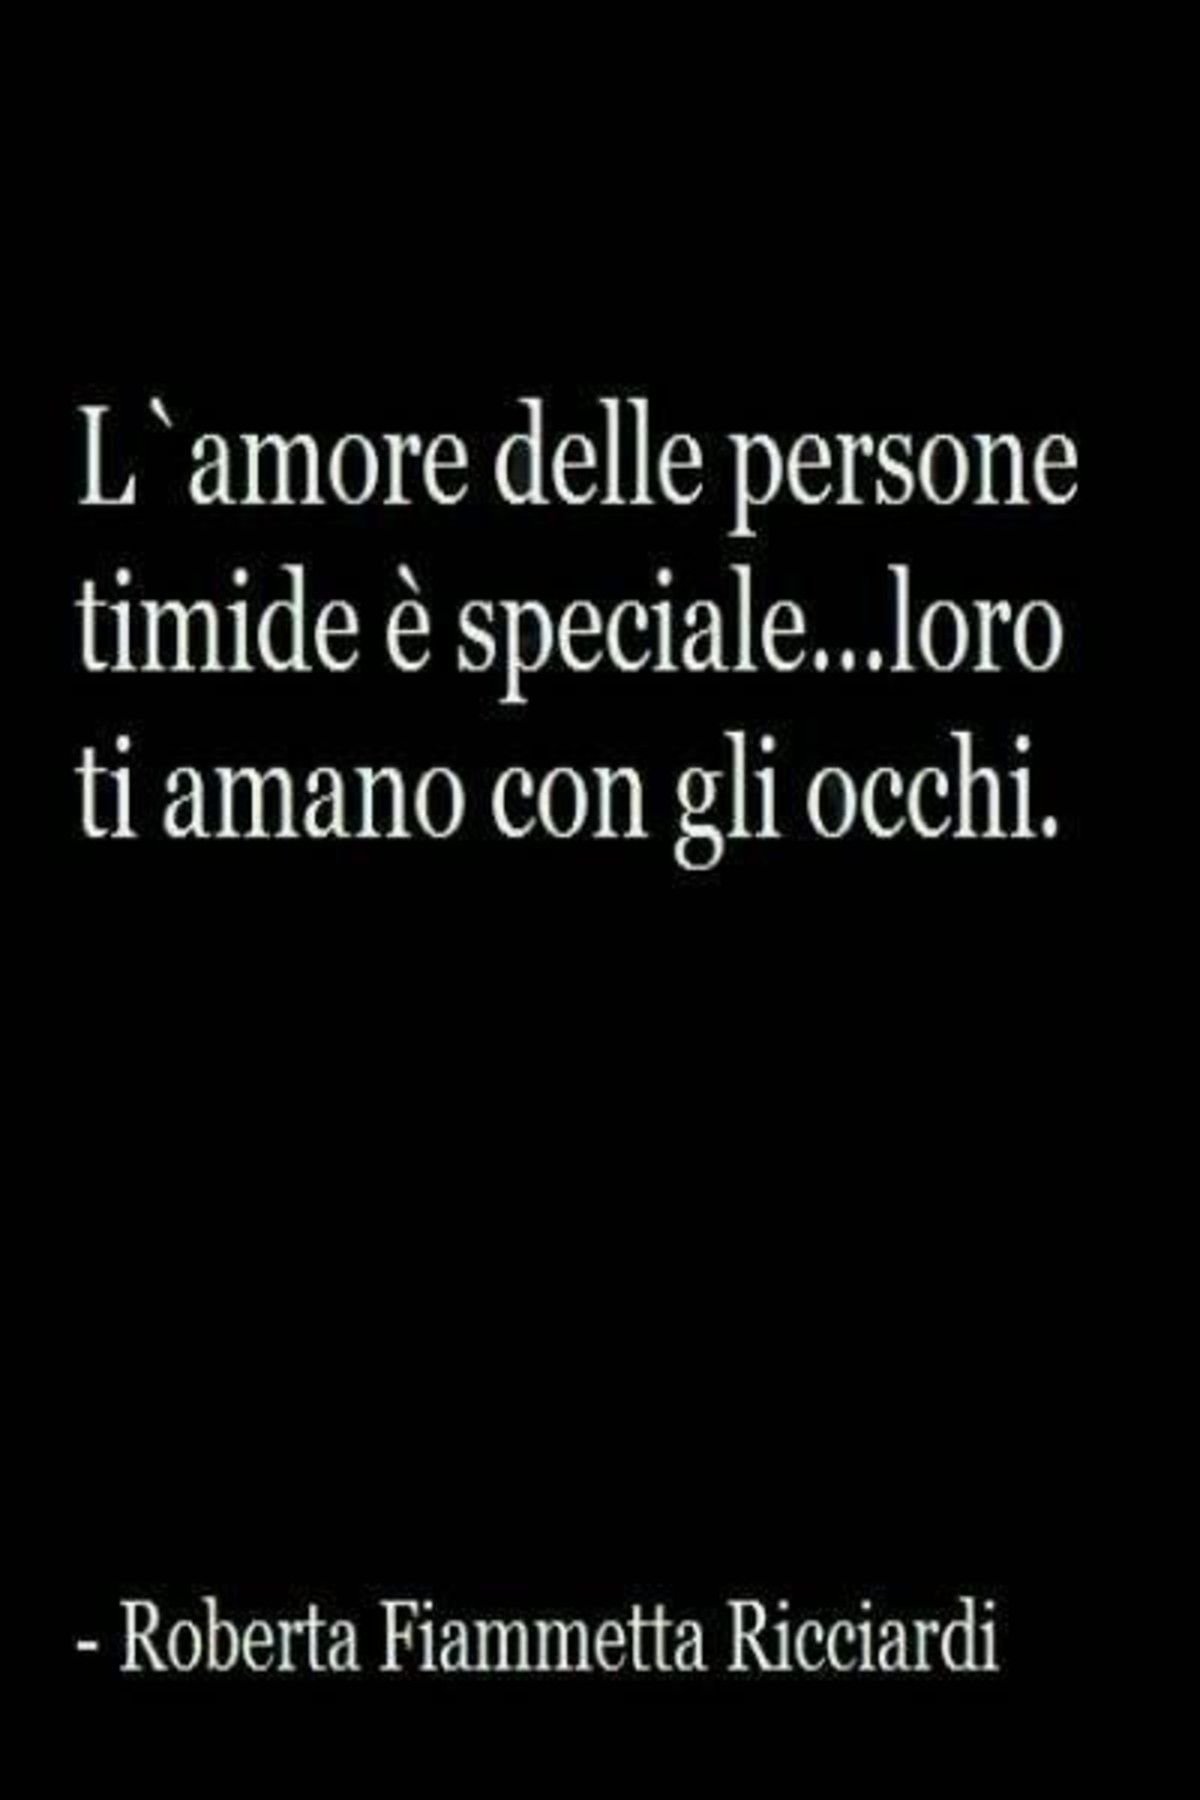 Frasi sulle persone timide